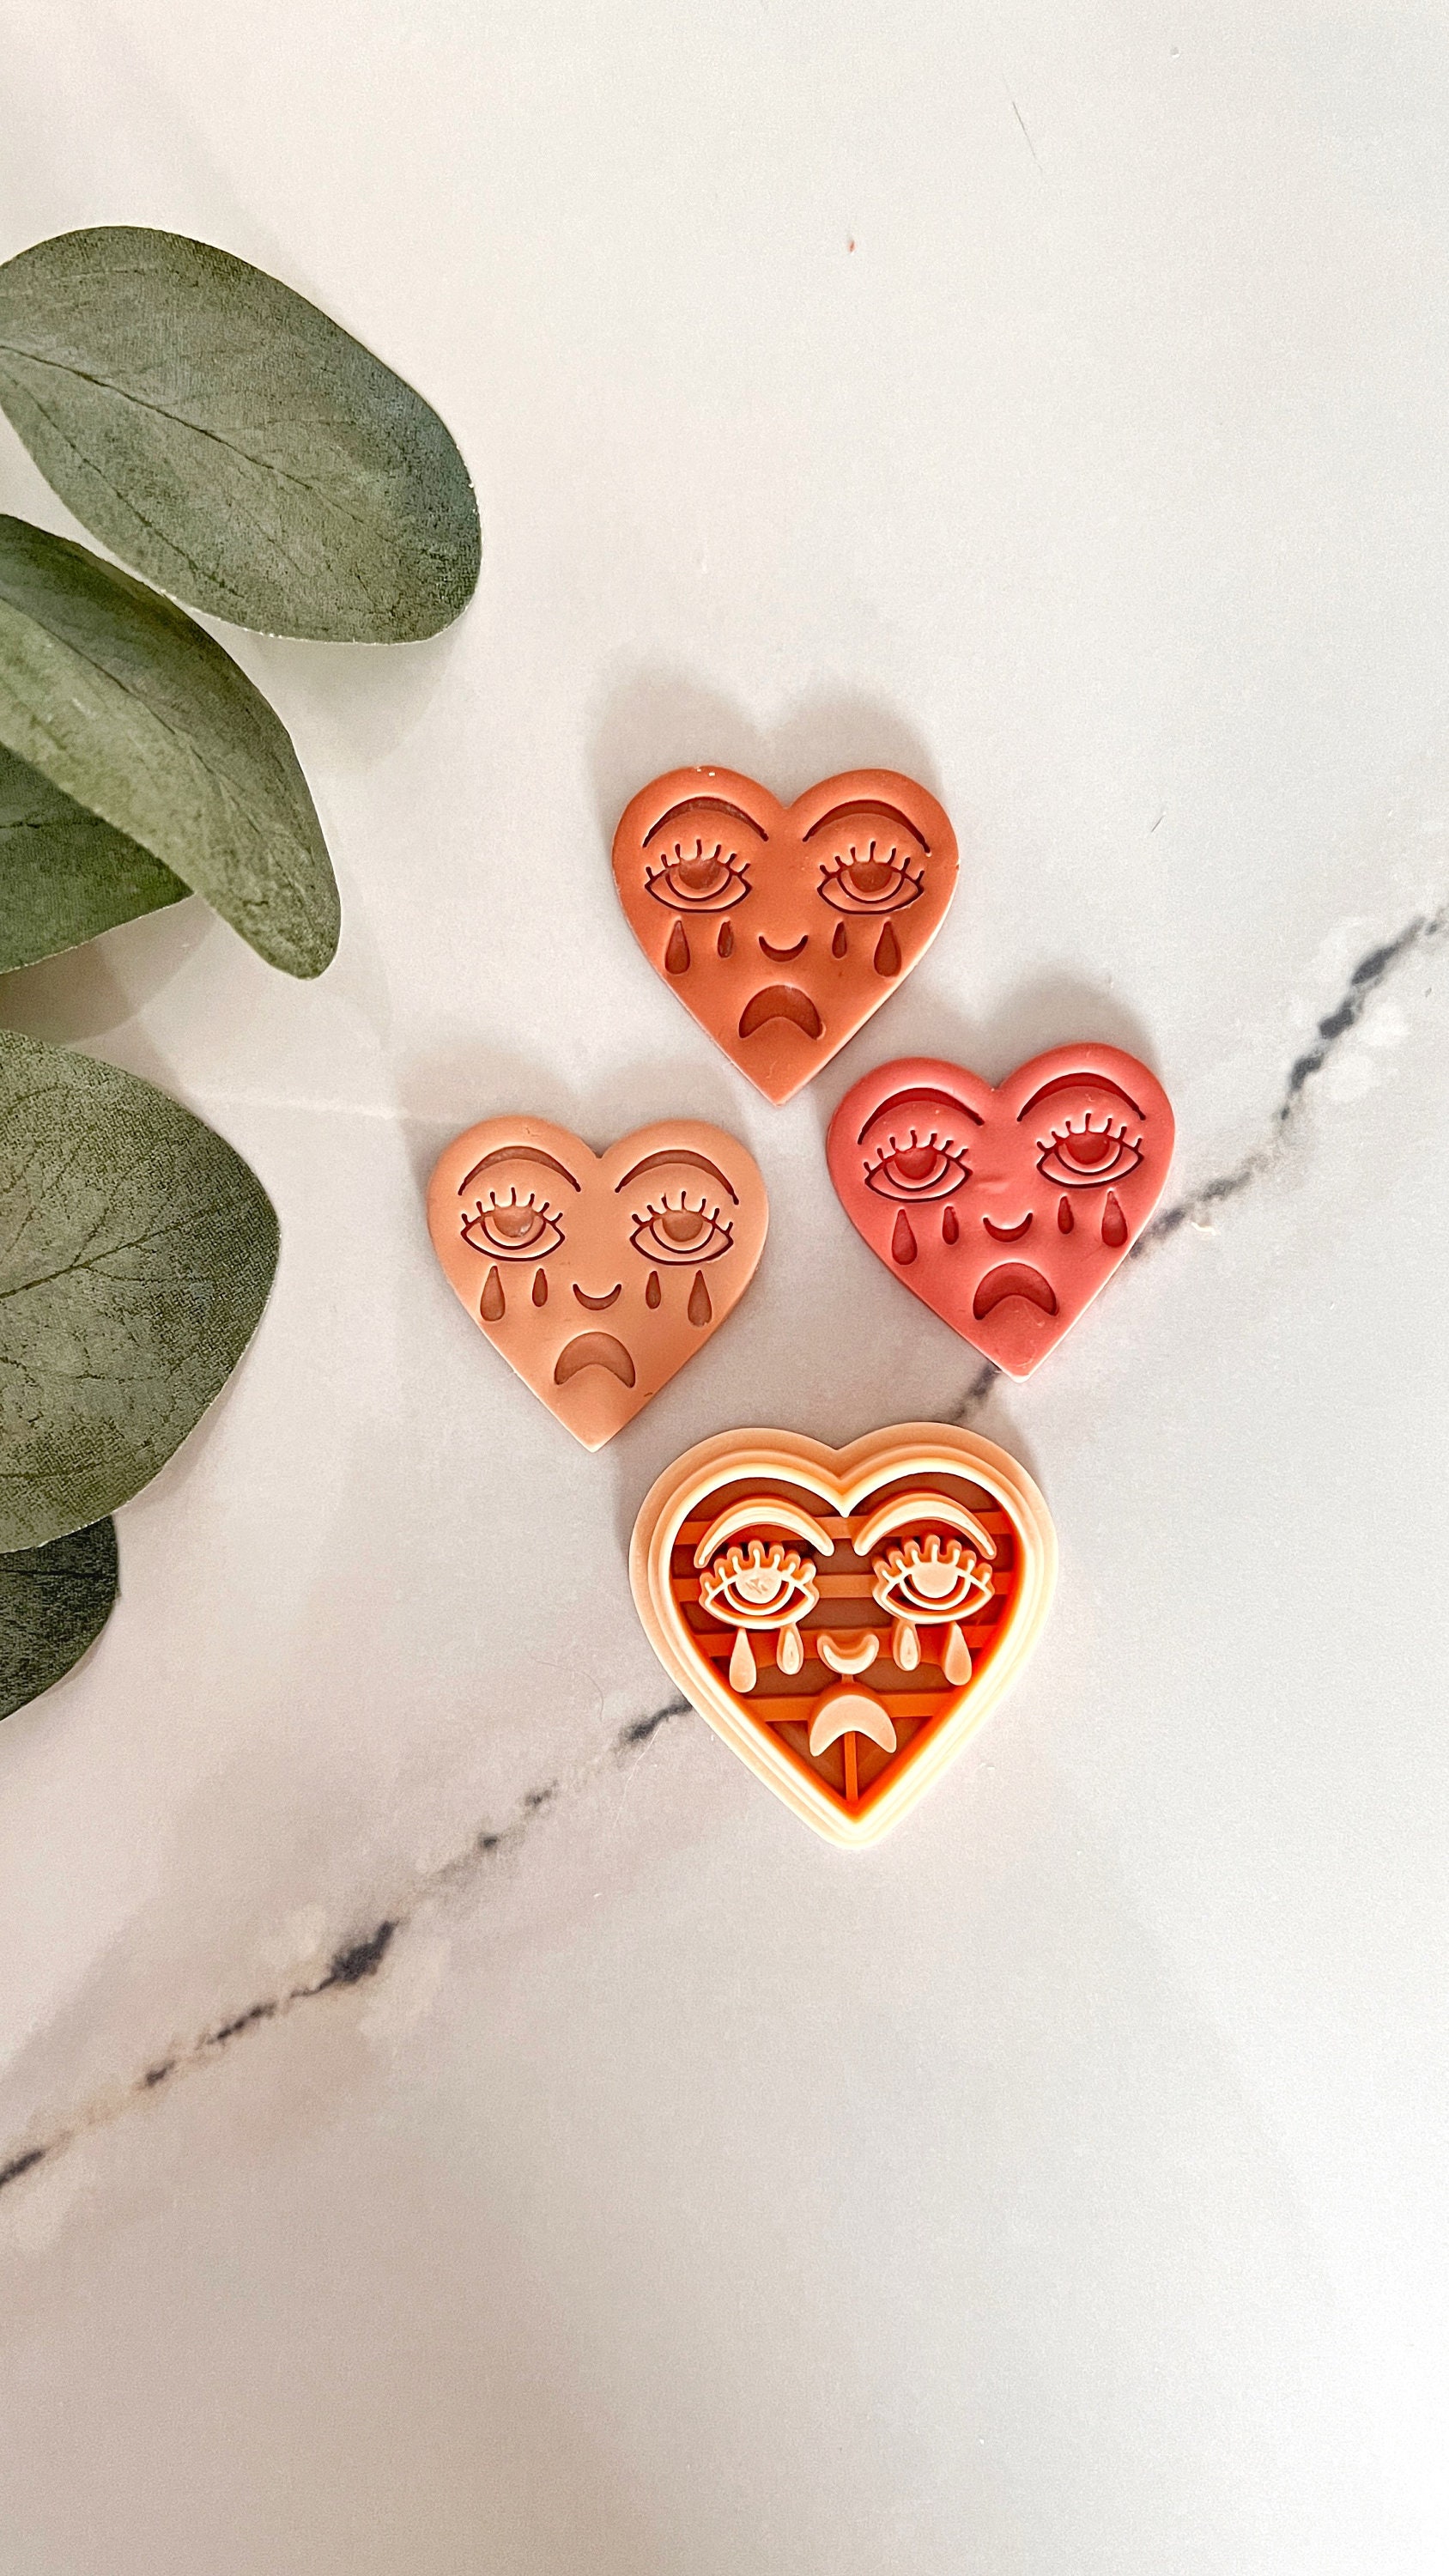 TAINSKY Valentines Candy Heart Clay Cutters-14 Pcs Valentines Polymer Clay Cutters for Earrings Making, Valentine Conversation Candy Hearts Clay